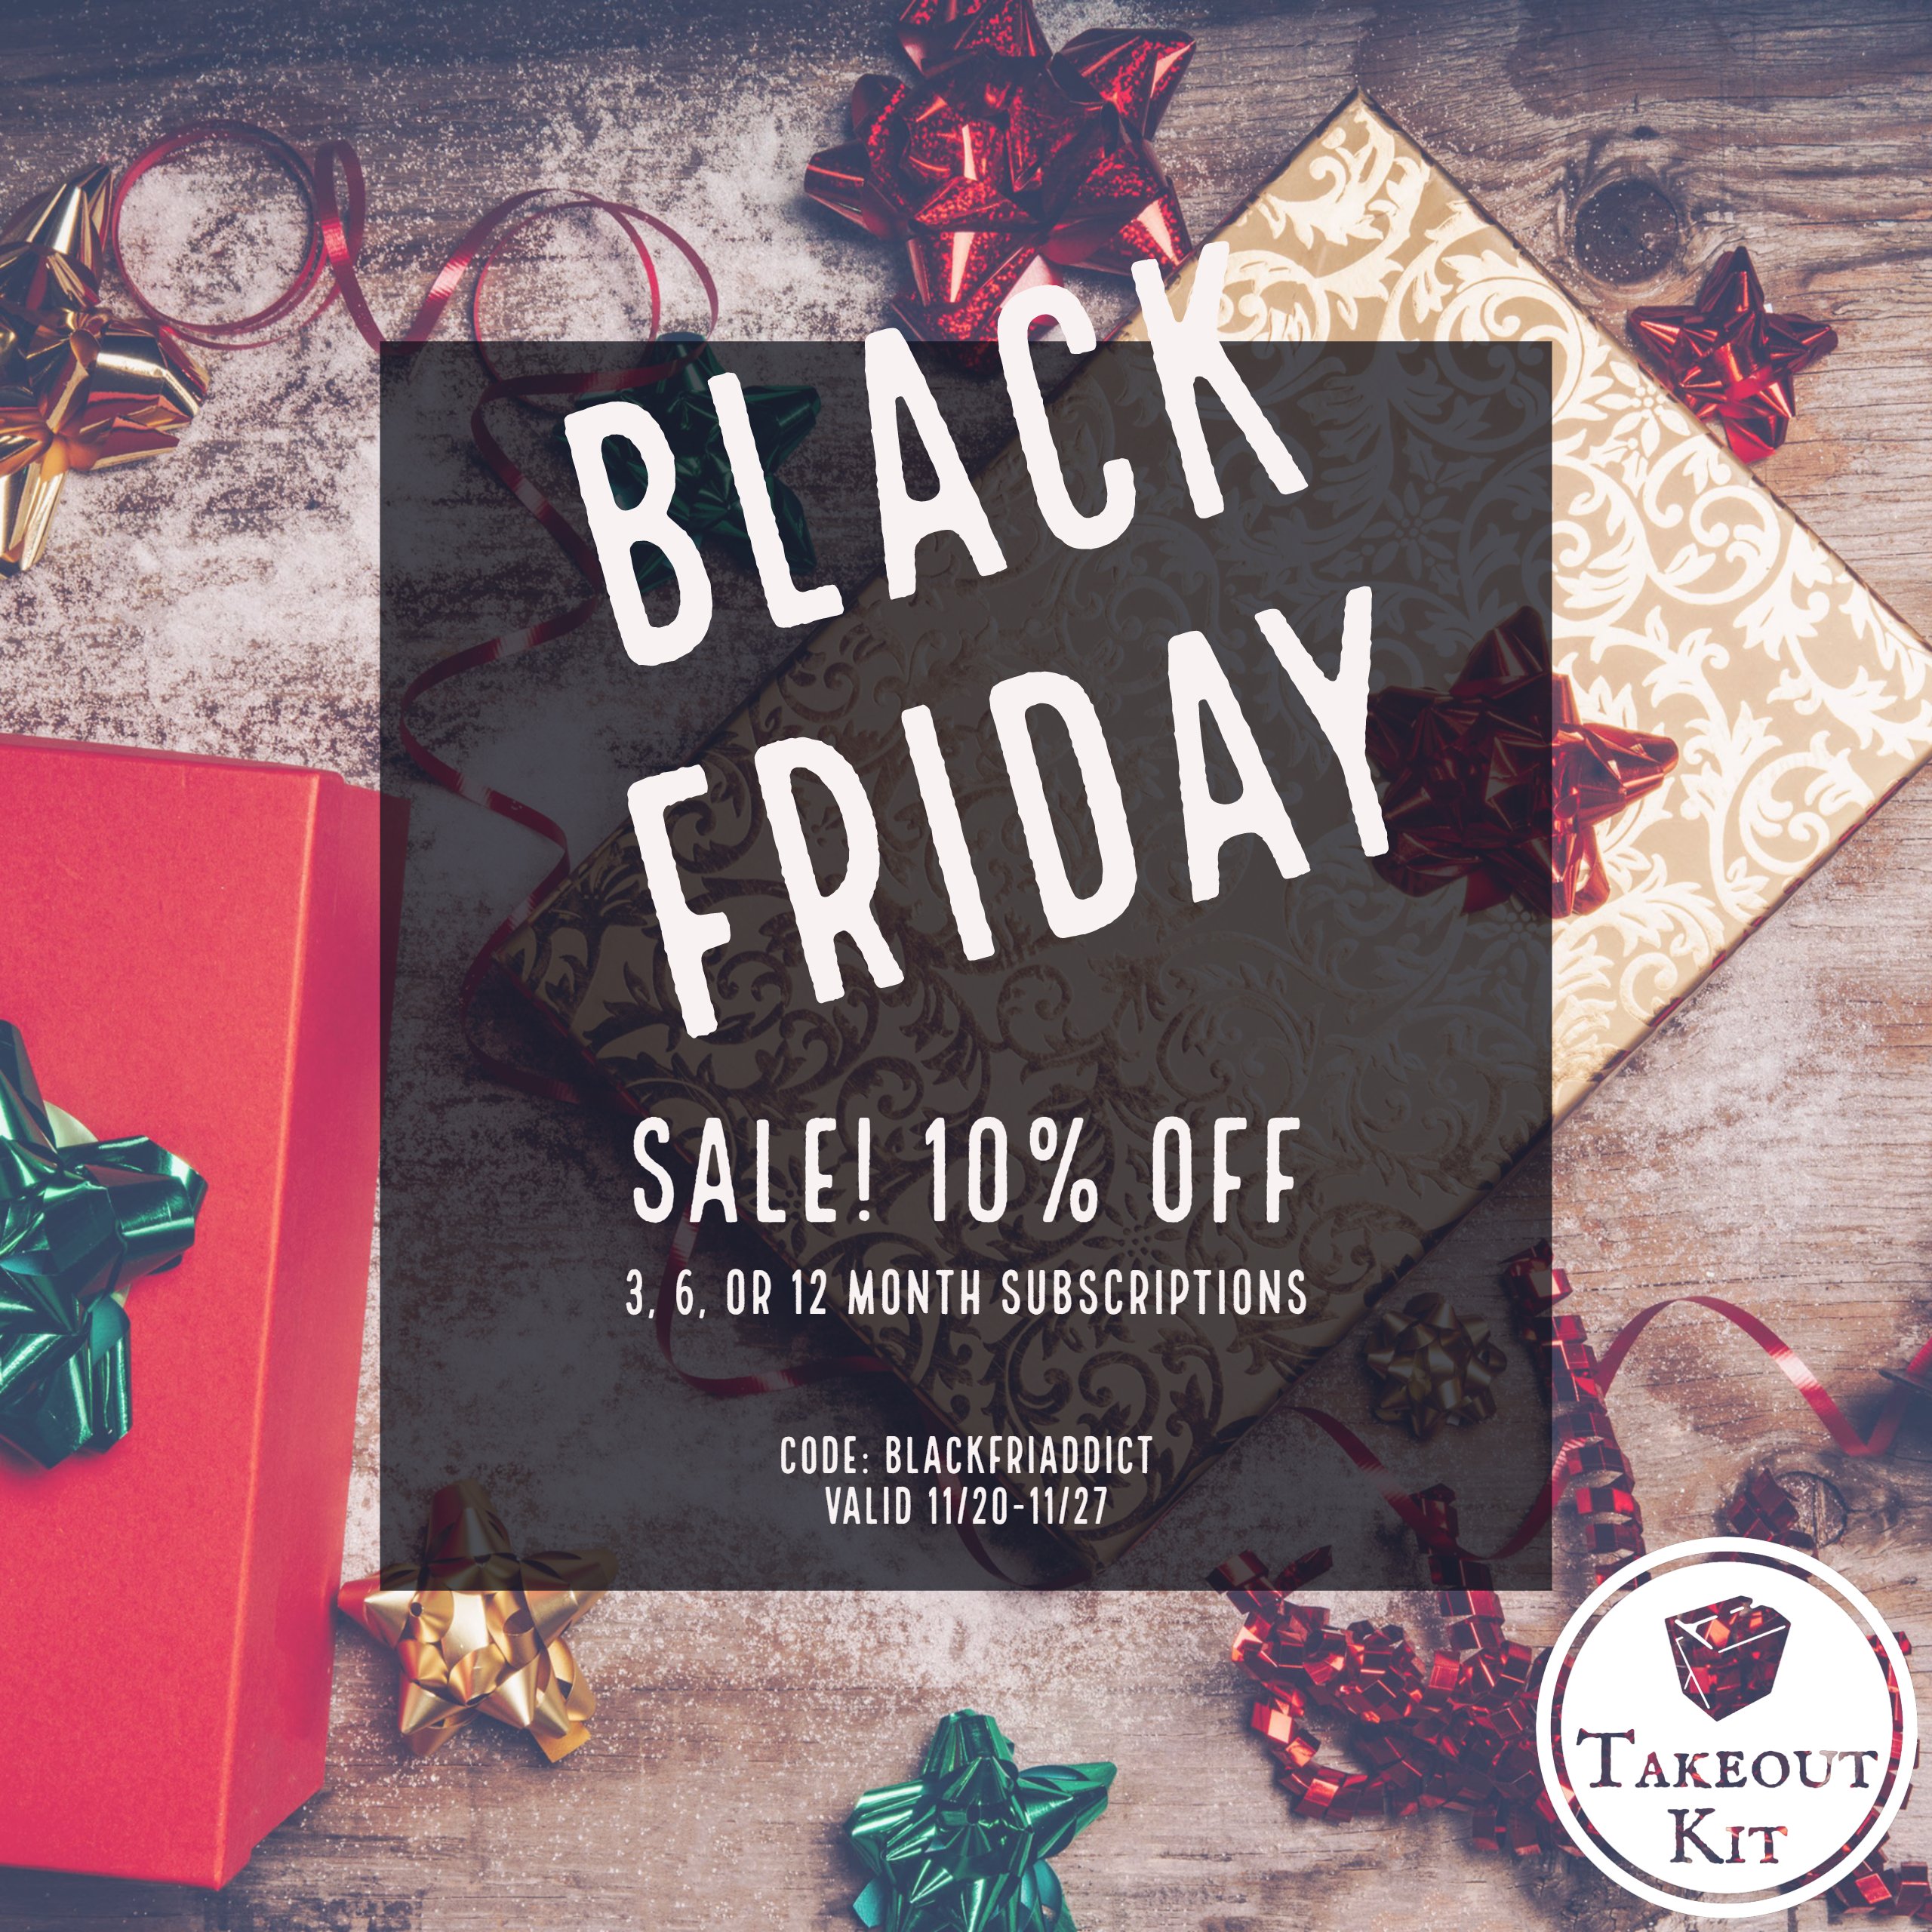 Takeout Kit Black Friday Coupon – 10% Off Longer Length Subscriptions!